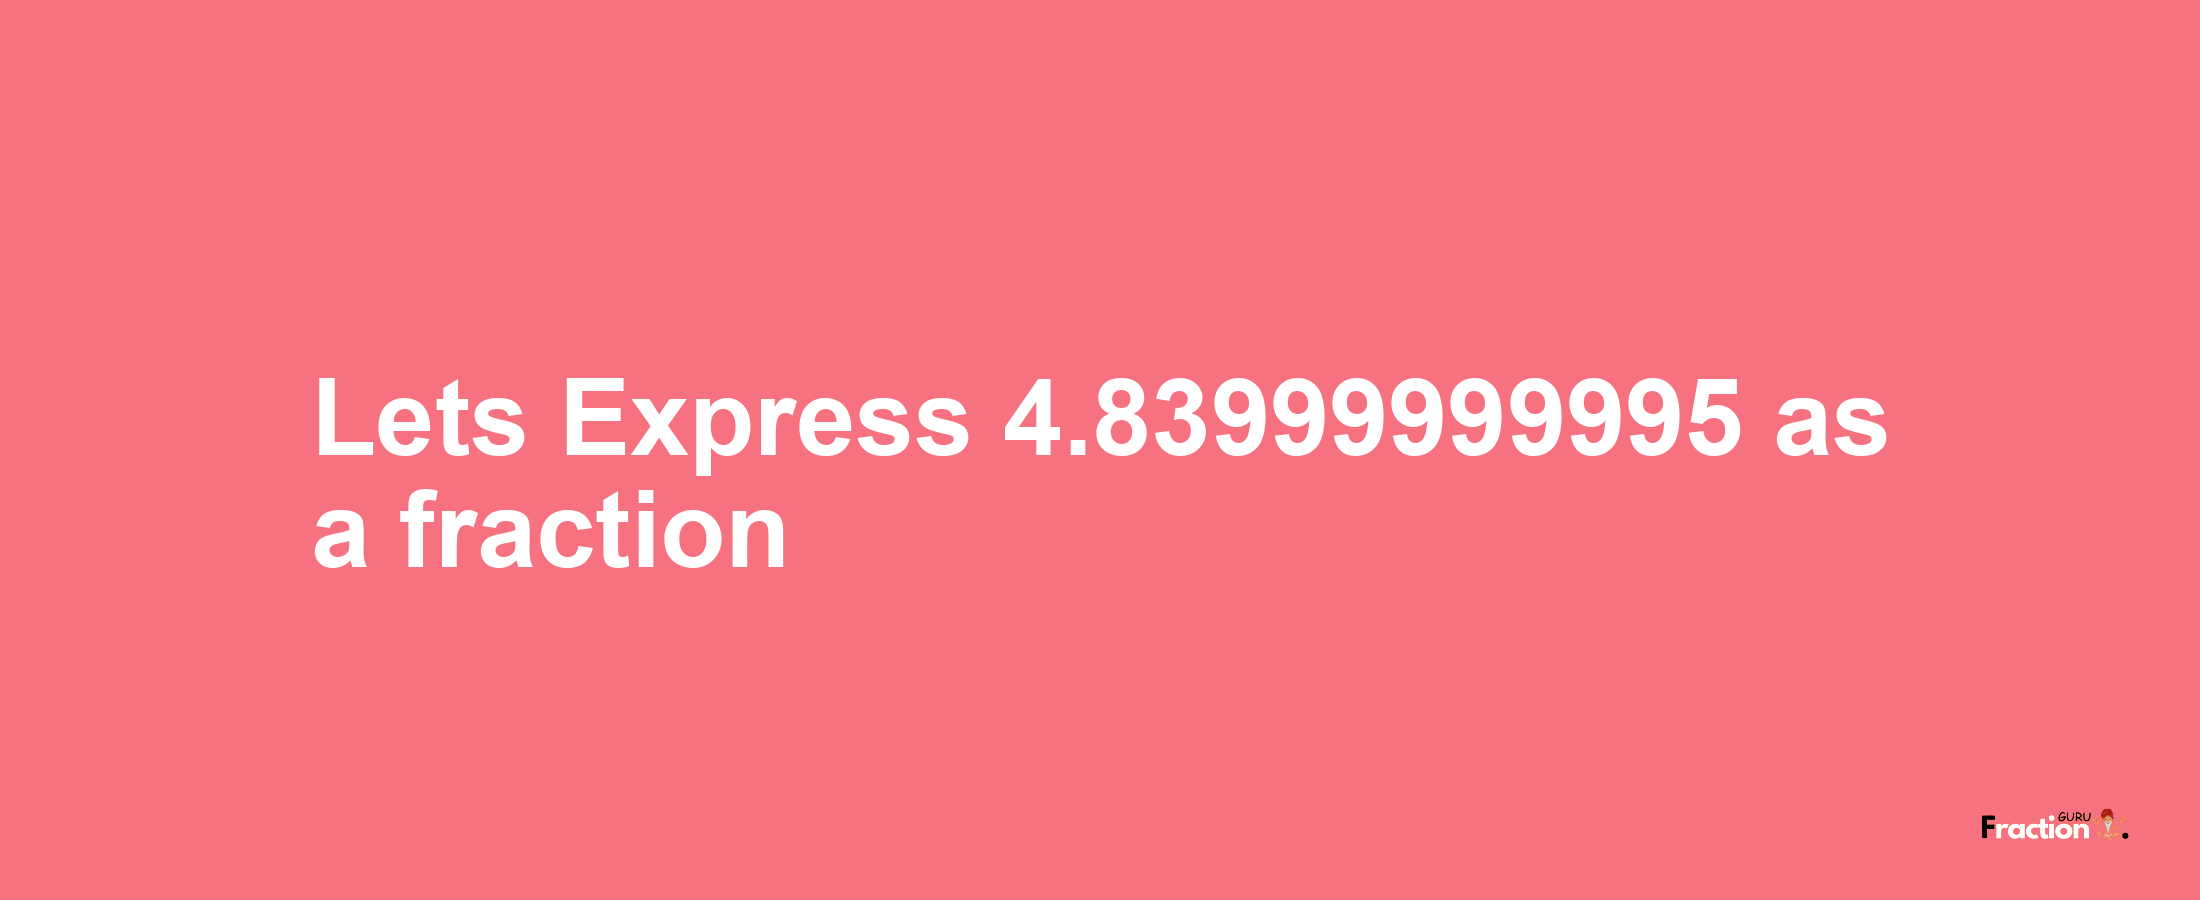 Lets Express 4.83999999995 as afraction